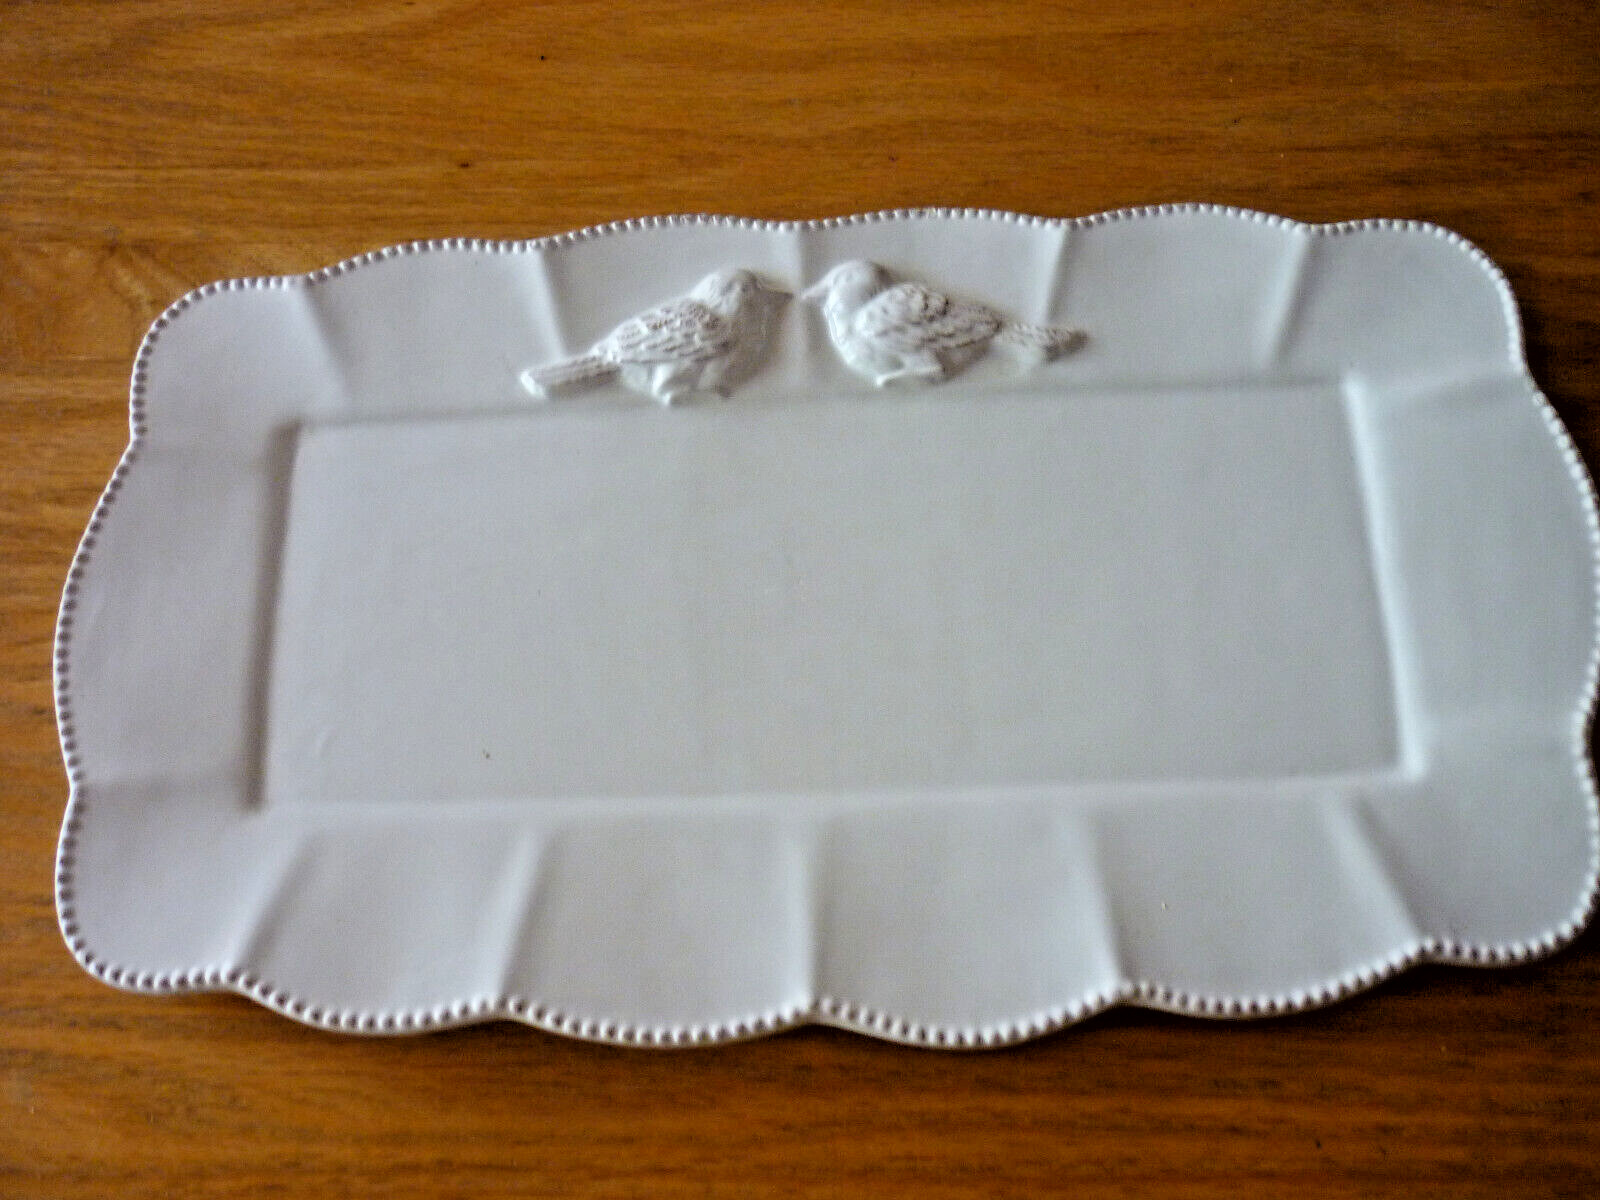 Mud Pie White Ceramic Tray with two Birds Embossed Design